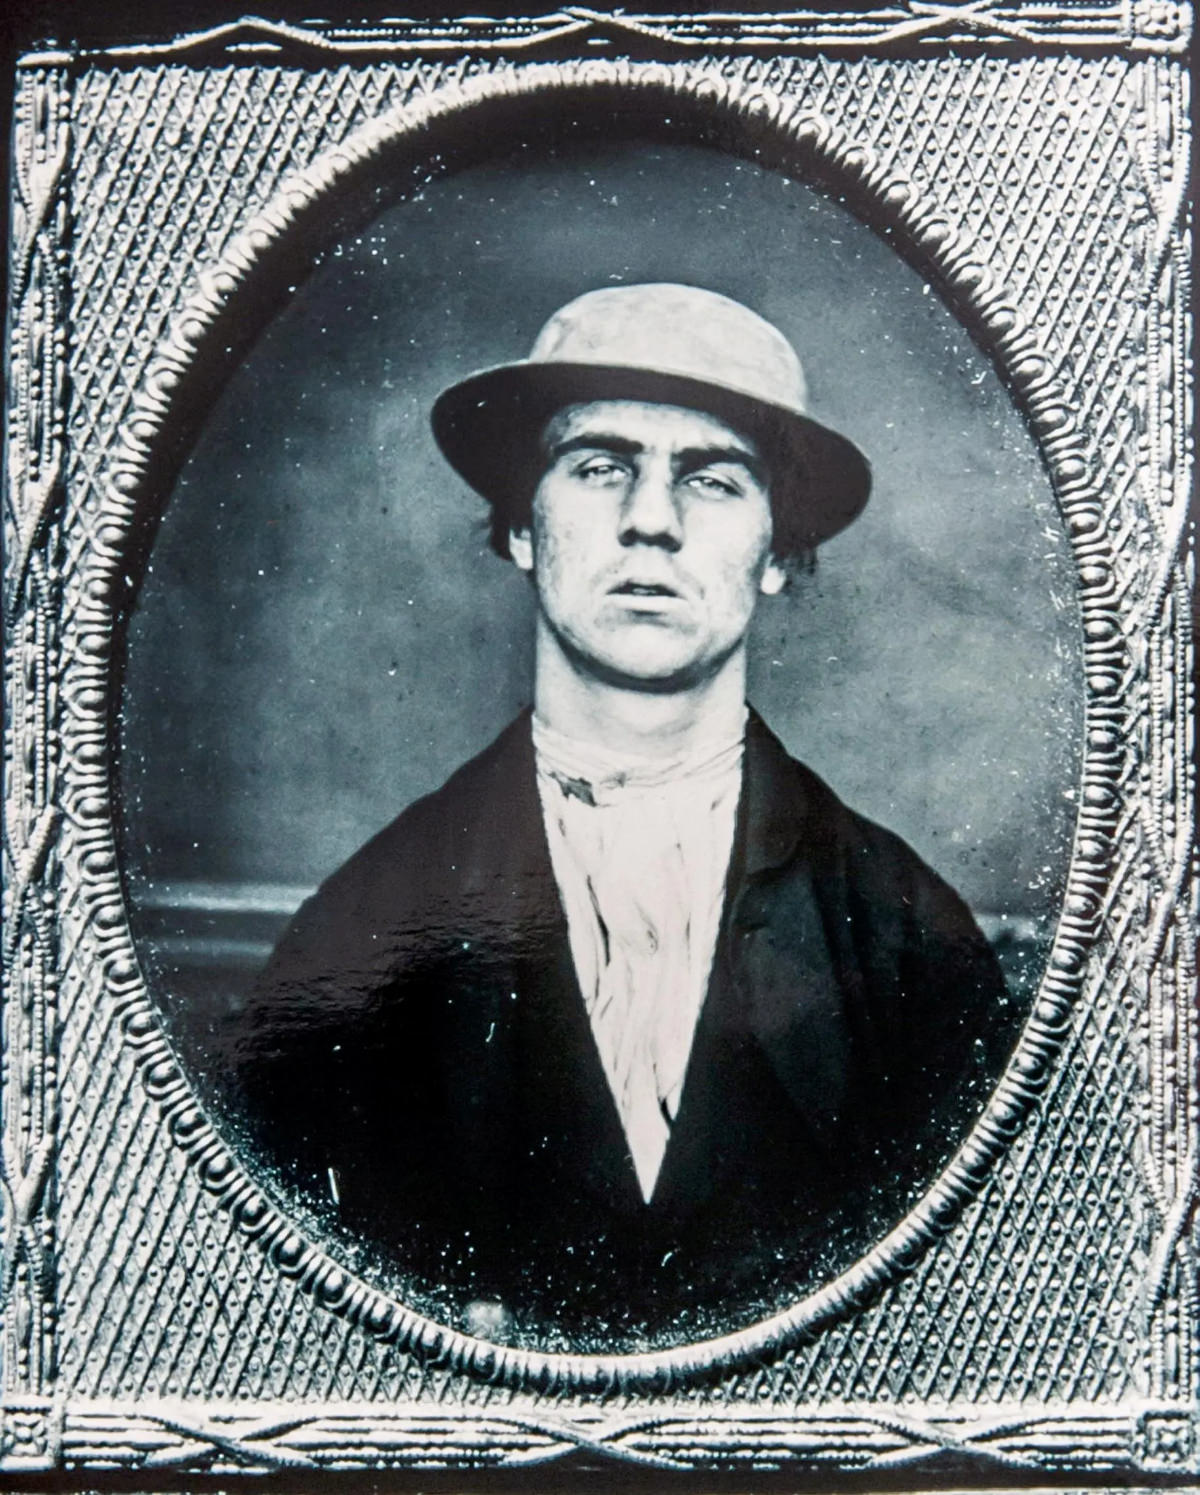 Joseph Martin was made to stand for a mugshot in August 1862, though it is now known what his crime was.